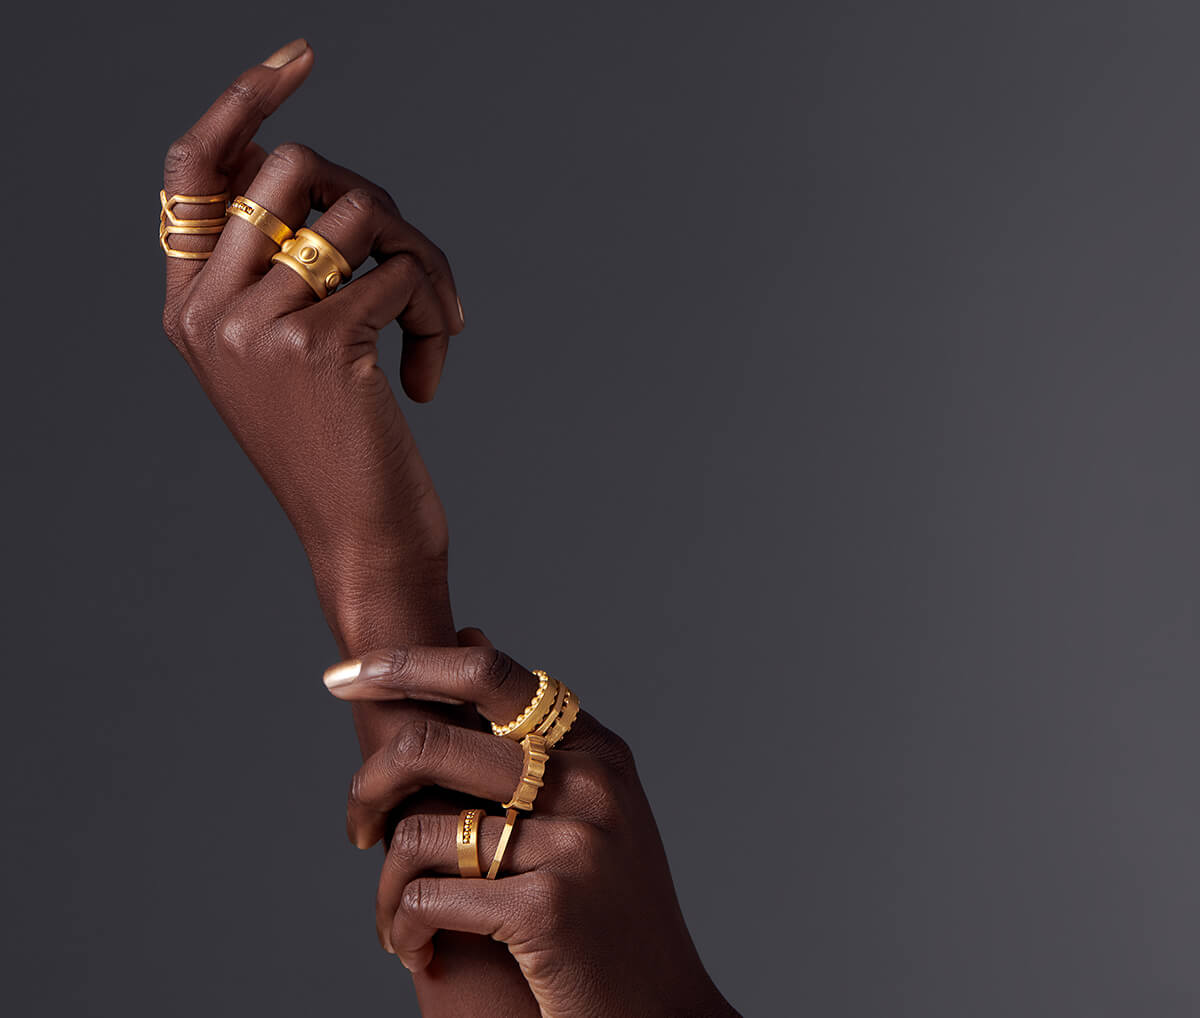 AUVERE TRUE GOLD — 22K and 24K gold jewelry